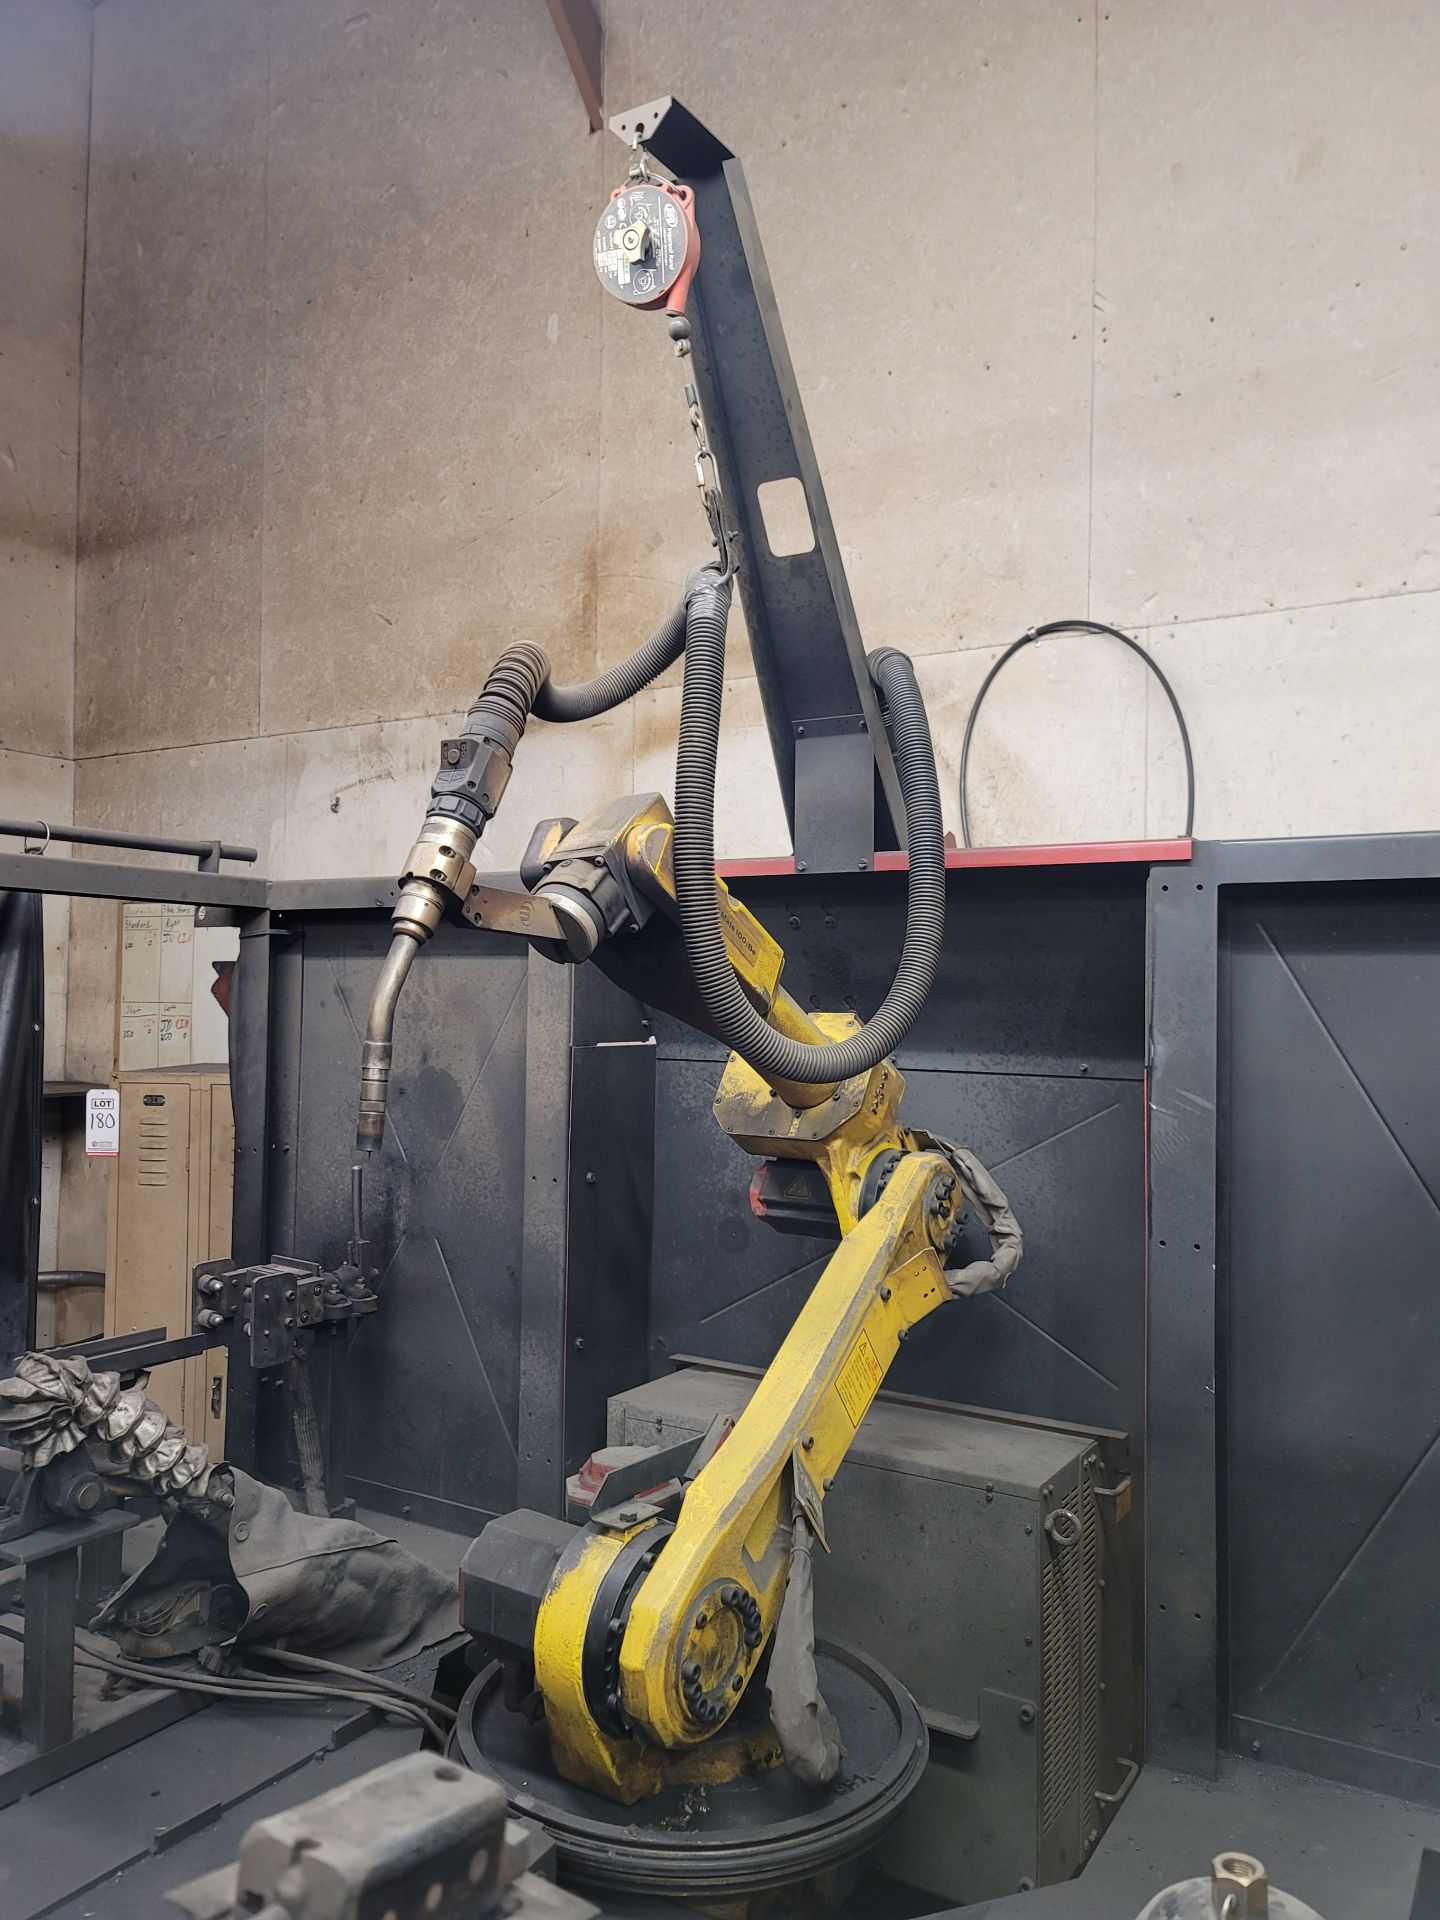 2004 LINCOLN ELECTRIC E-CELL ROBOTIC WELDING SYSTEM, FANUC 6-AXIS ROBOT 100IBE W/ RJ3IB - Image 3 of 13